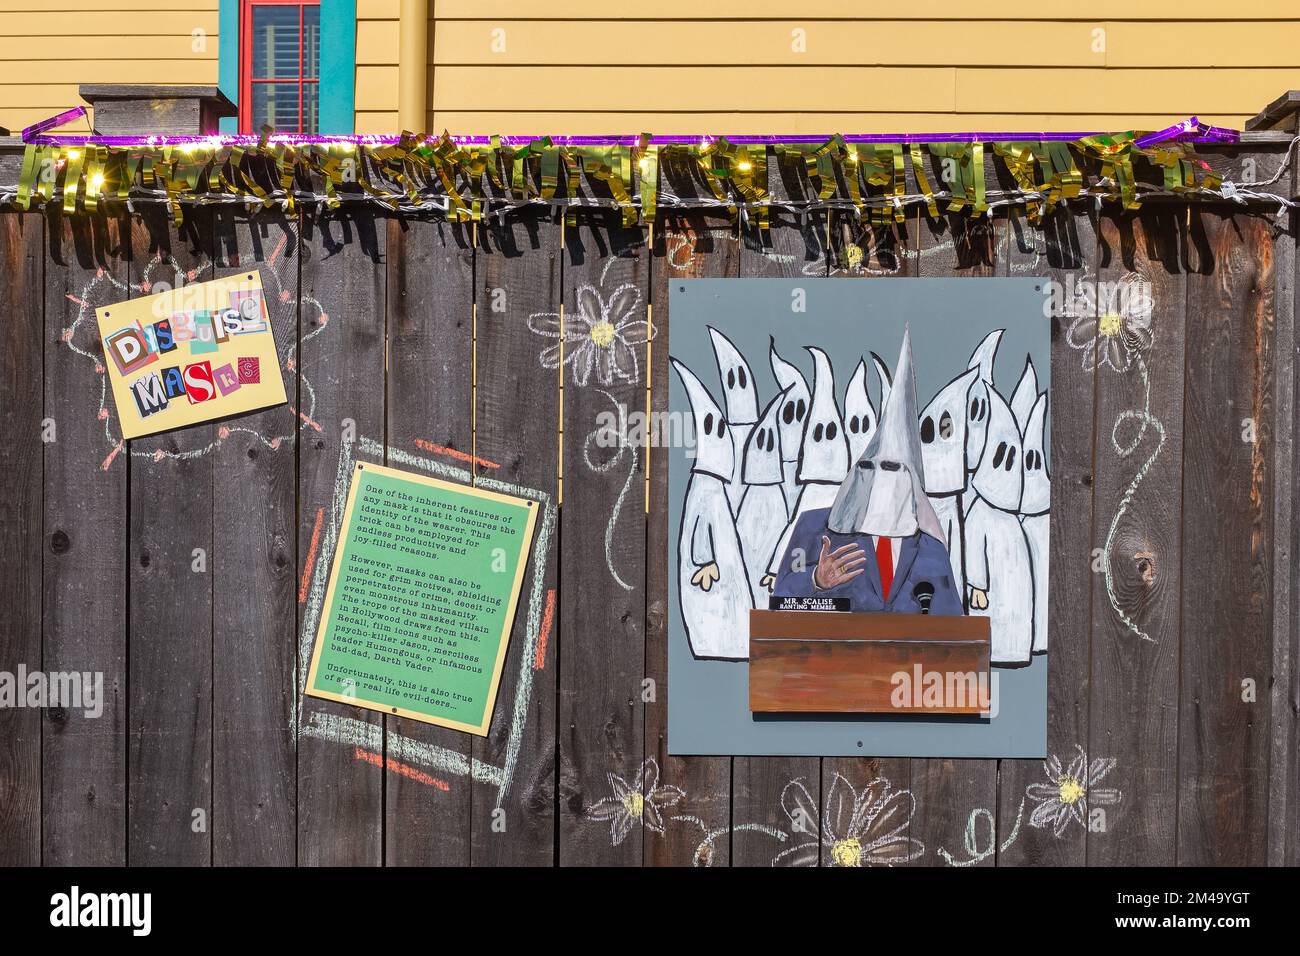 NEW ORLEANS, LA, USA - FEBRUARY 1, 2021: Fence decorated for Mardi Gras with artwork and information about masks and disguises  using political satire Stock Photo